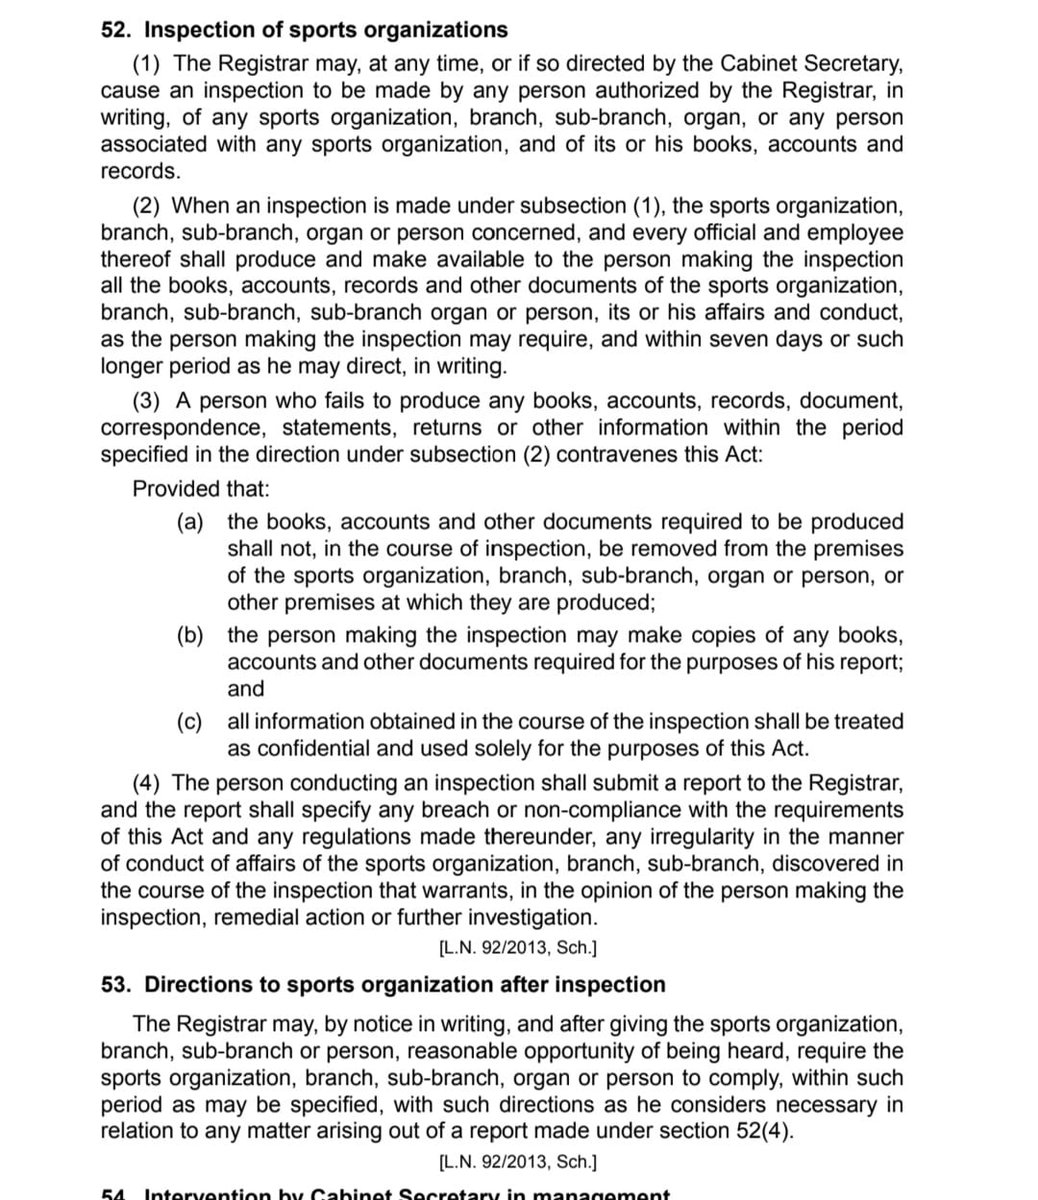 How hard was it for CS @AMB_A_Mohammed to plainly read the statute that gives her the powers to set up the caretaker committee and comply so that we indeed achieve the reforms she claims to be establishing. Sec 52-54 is drafted in plain English. Any judge will see the facts 1/2